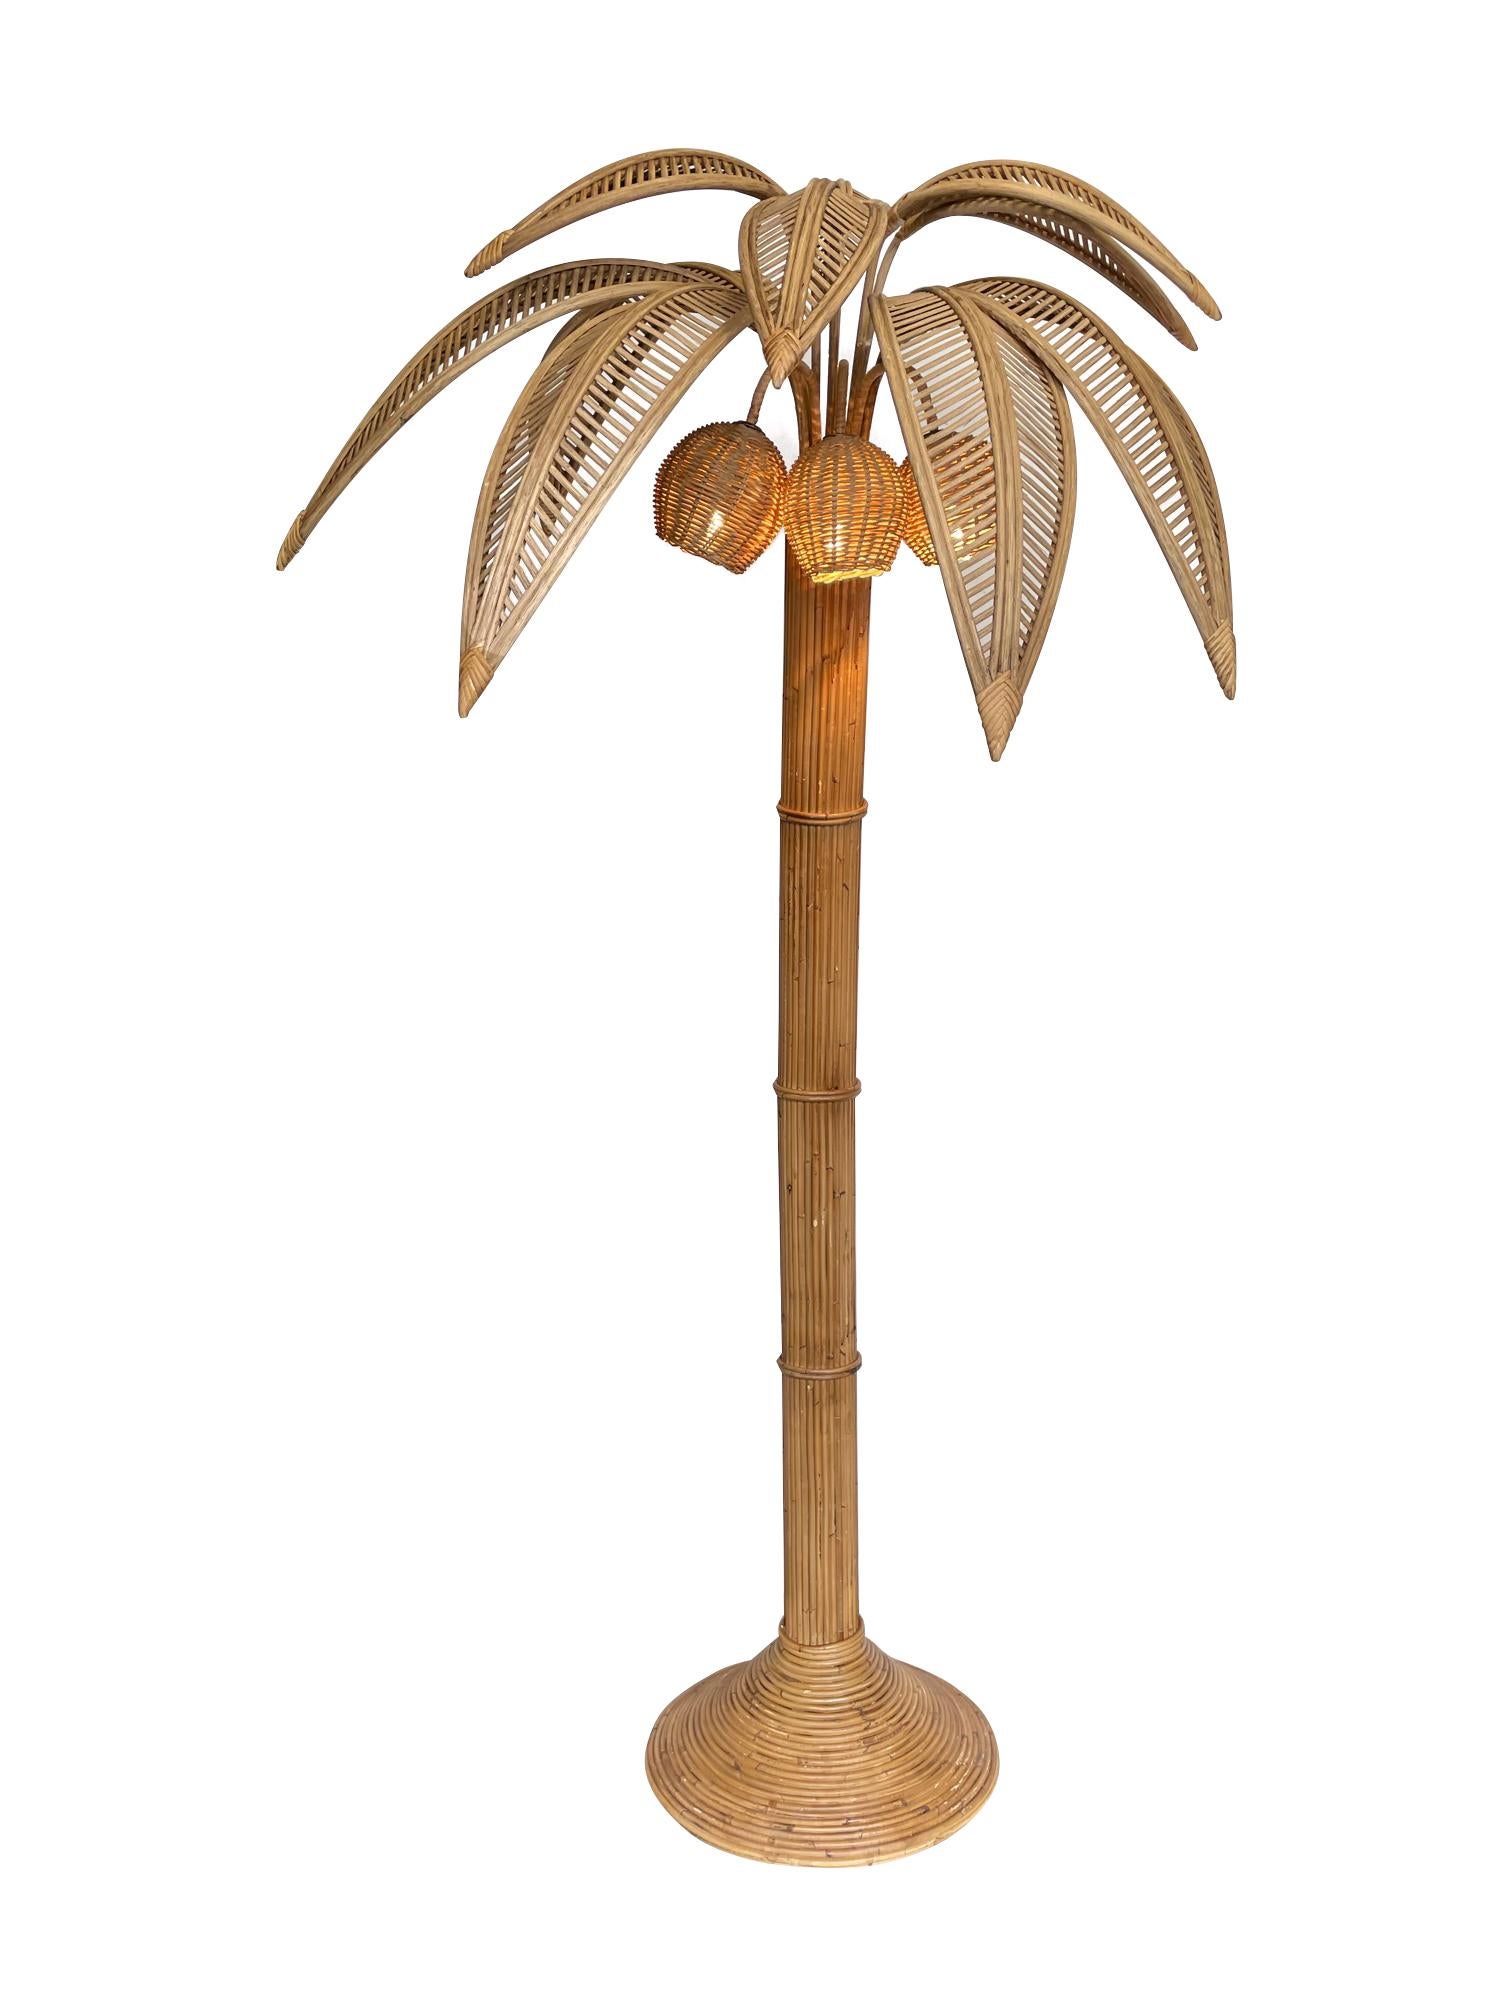 A large rattan palm tree floor light, with bulbs in the three coconuts in the style of Mario Lopez Torres.